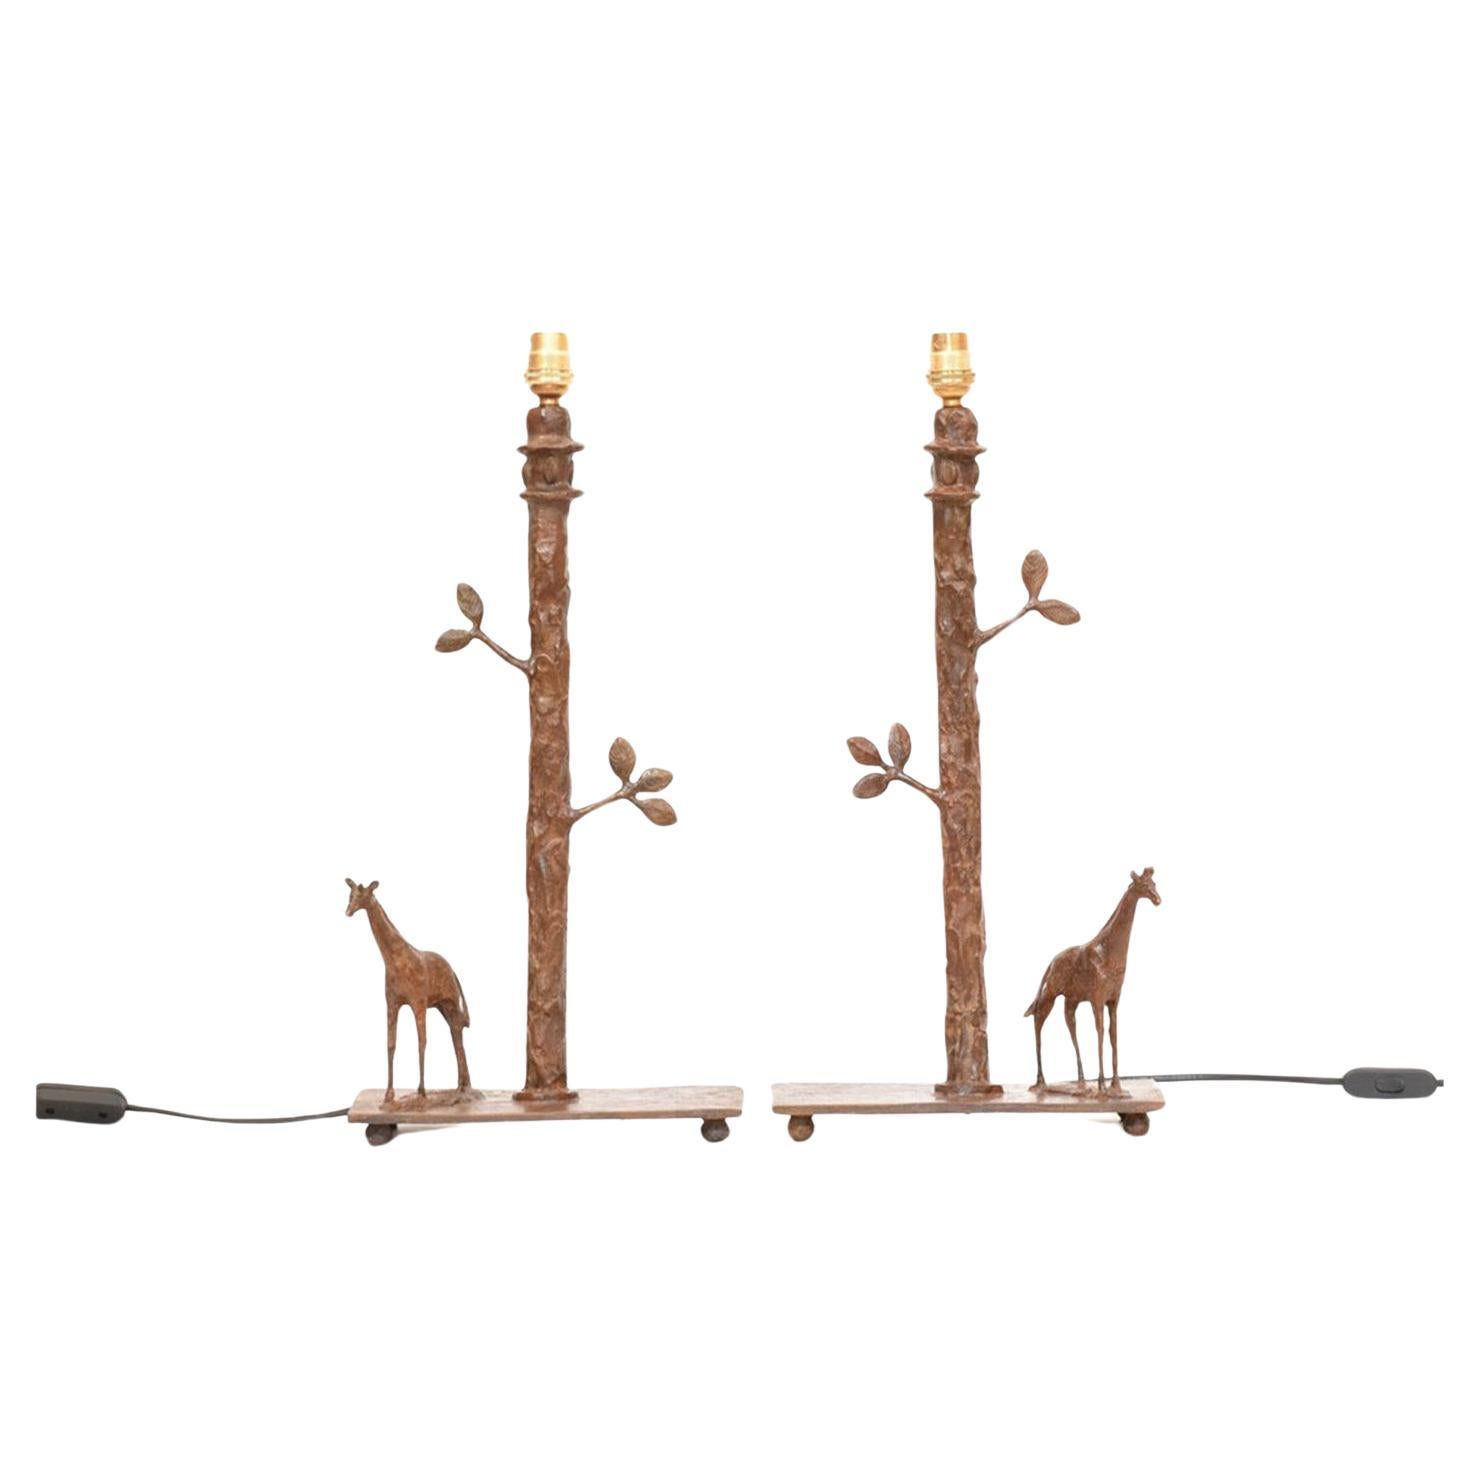 Handcrafted Sculptural Giraffe Table Lamps in cast bronze made using the lost wax method. Comes as a pair, excludes lamp shades. Sculpted, cast and finished individually by hand.

Height 41 cm (includes brass light fittings, excludes lamp shades).